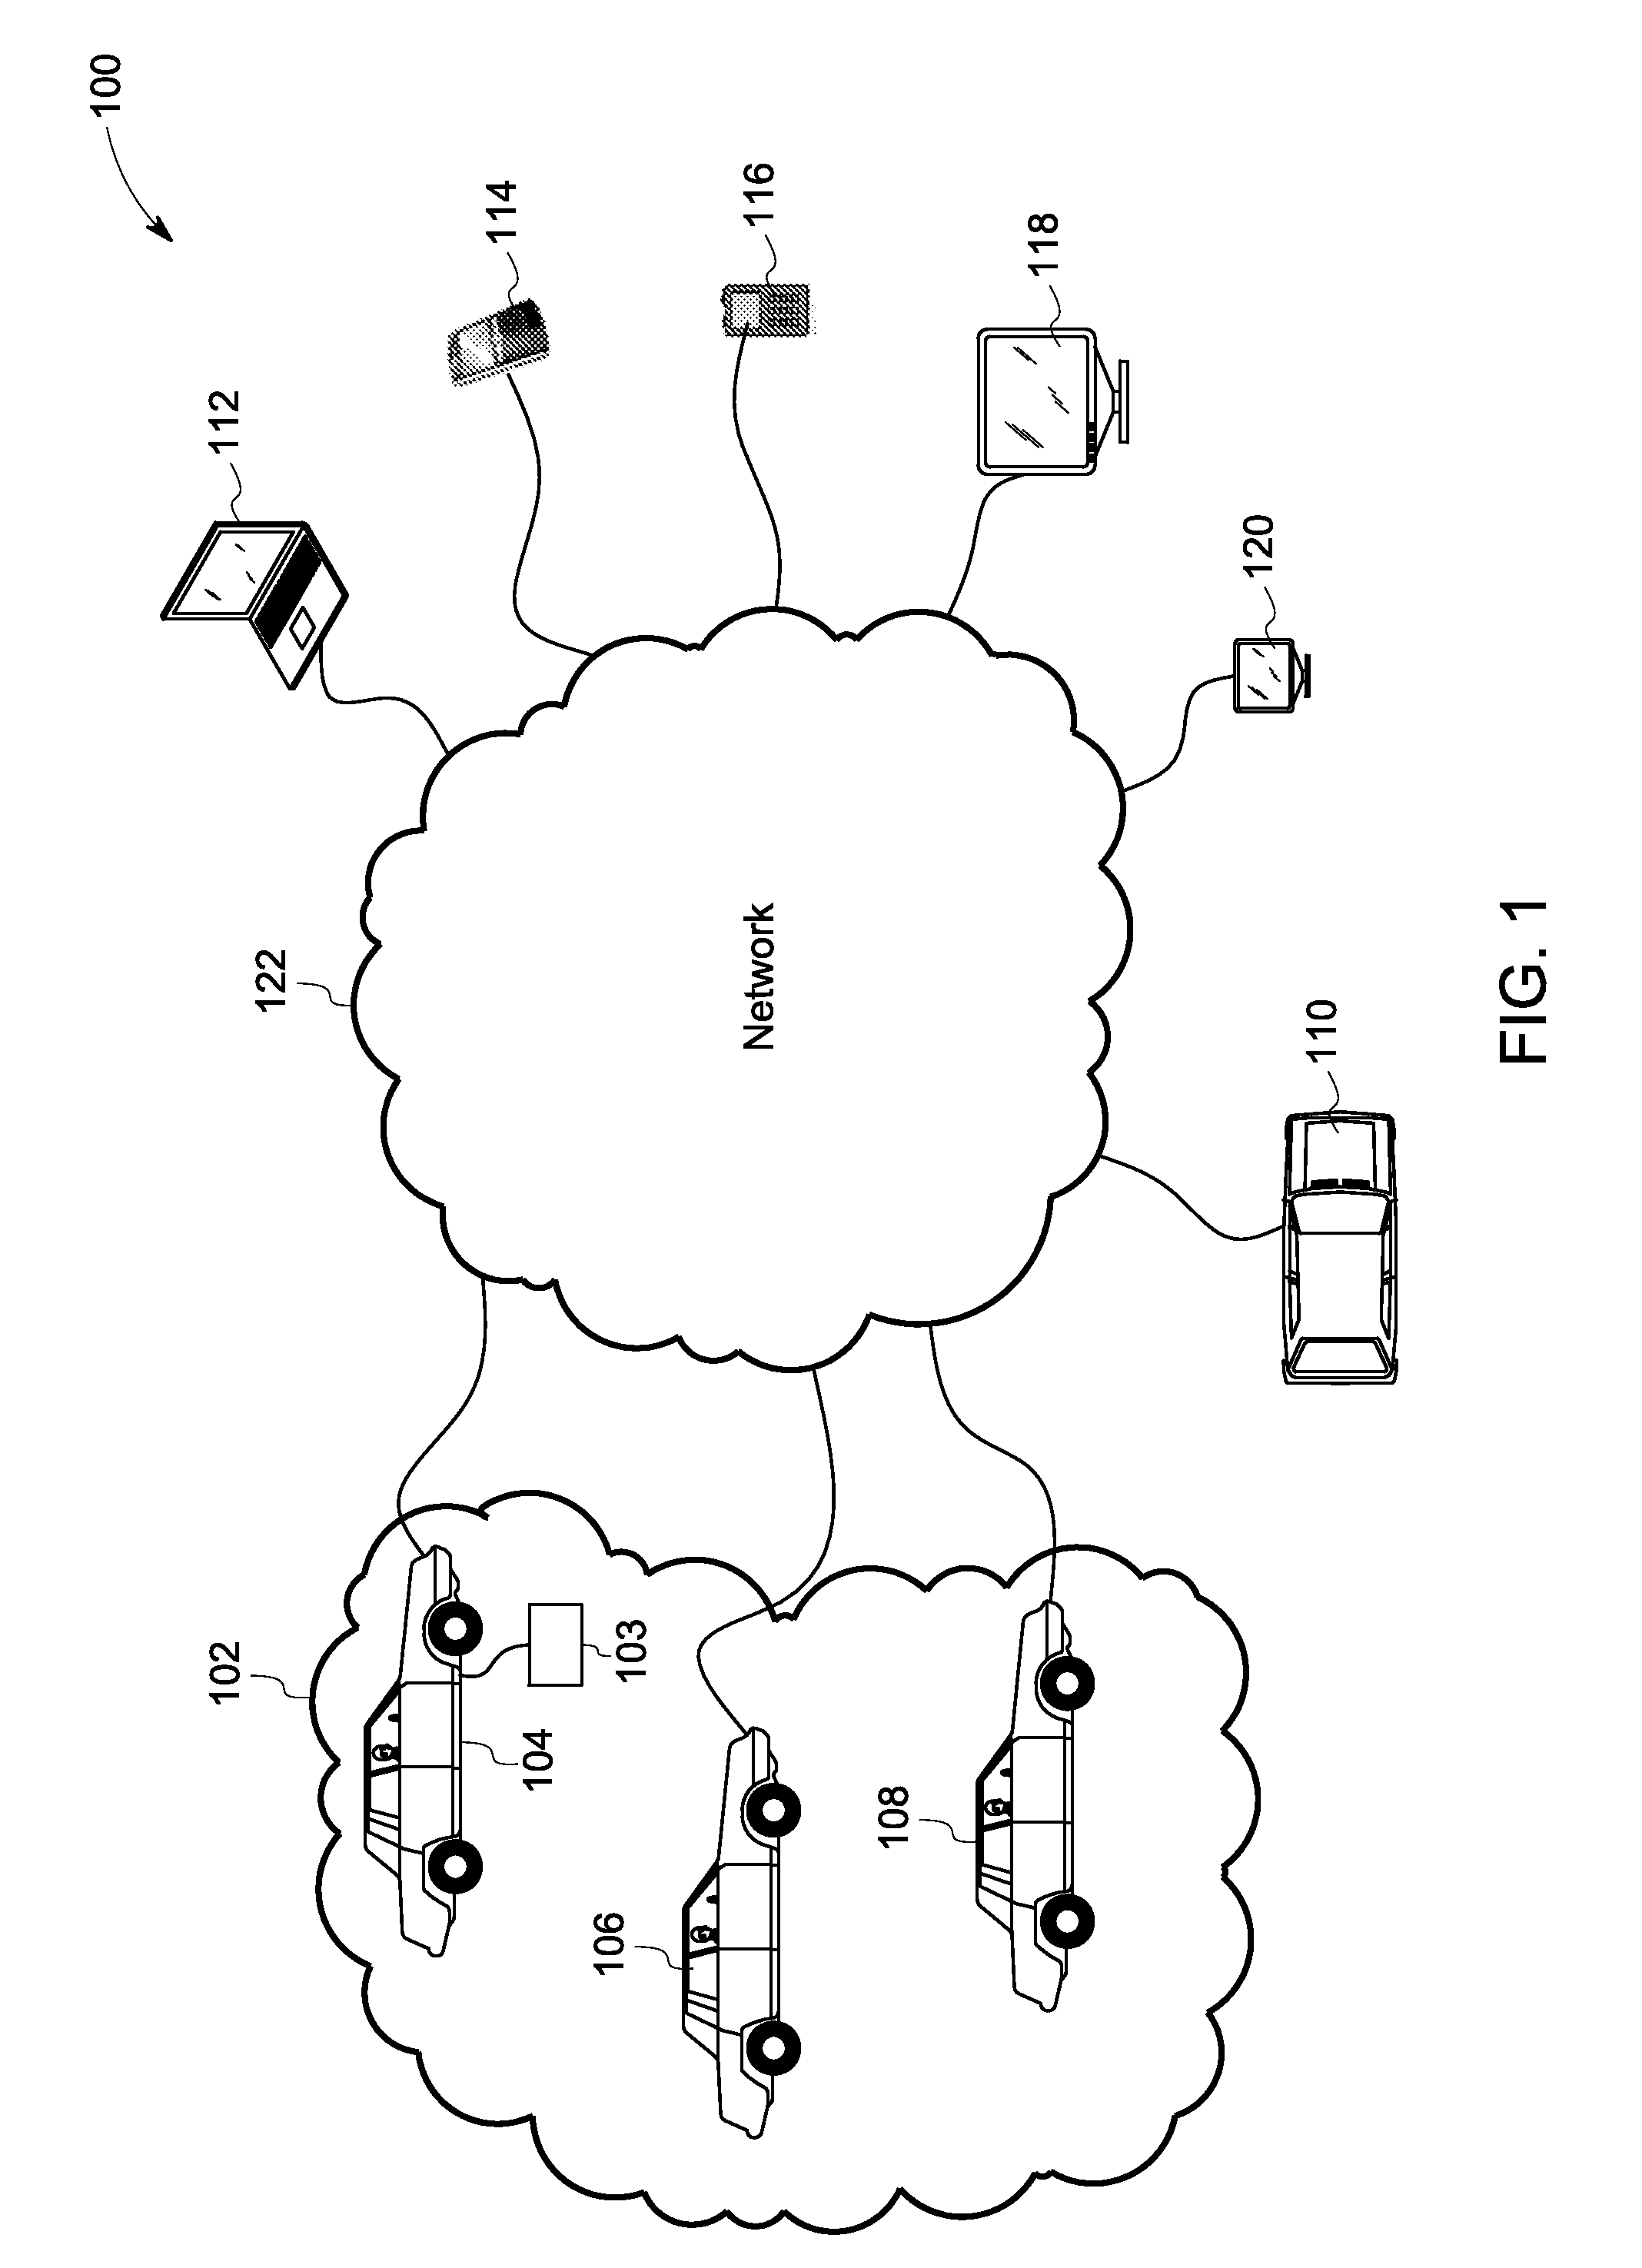 Method and system for distributed computation